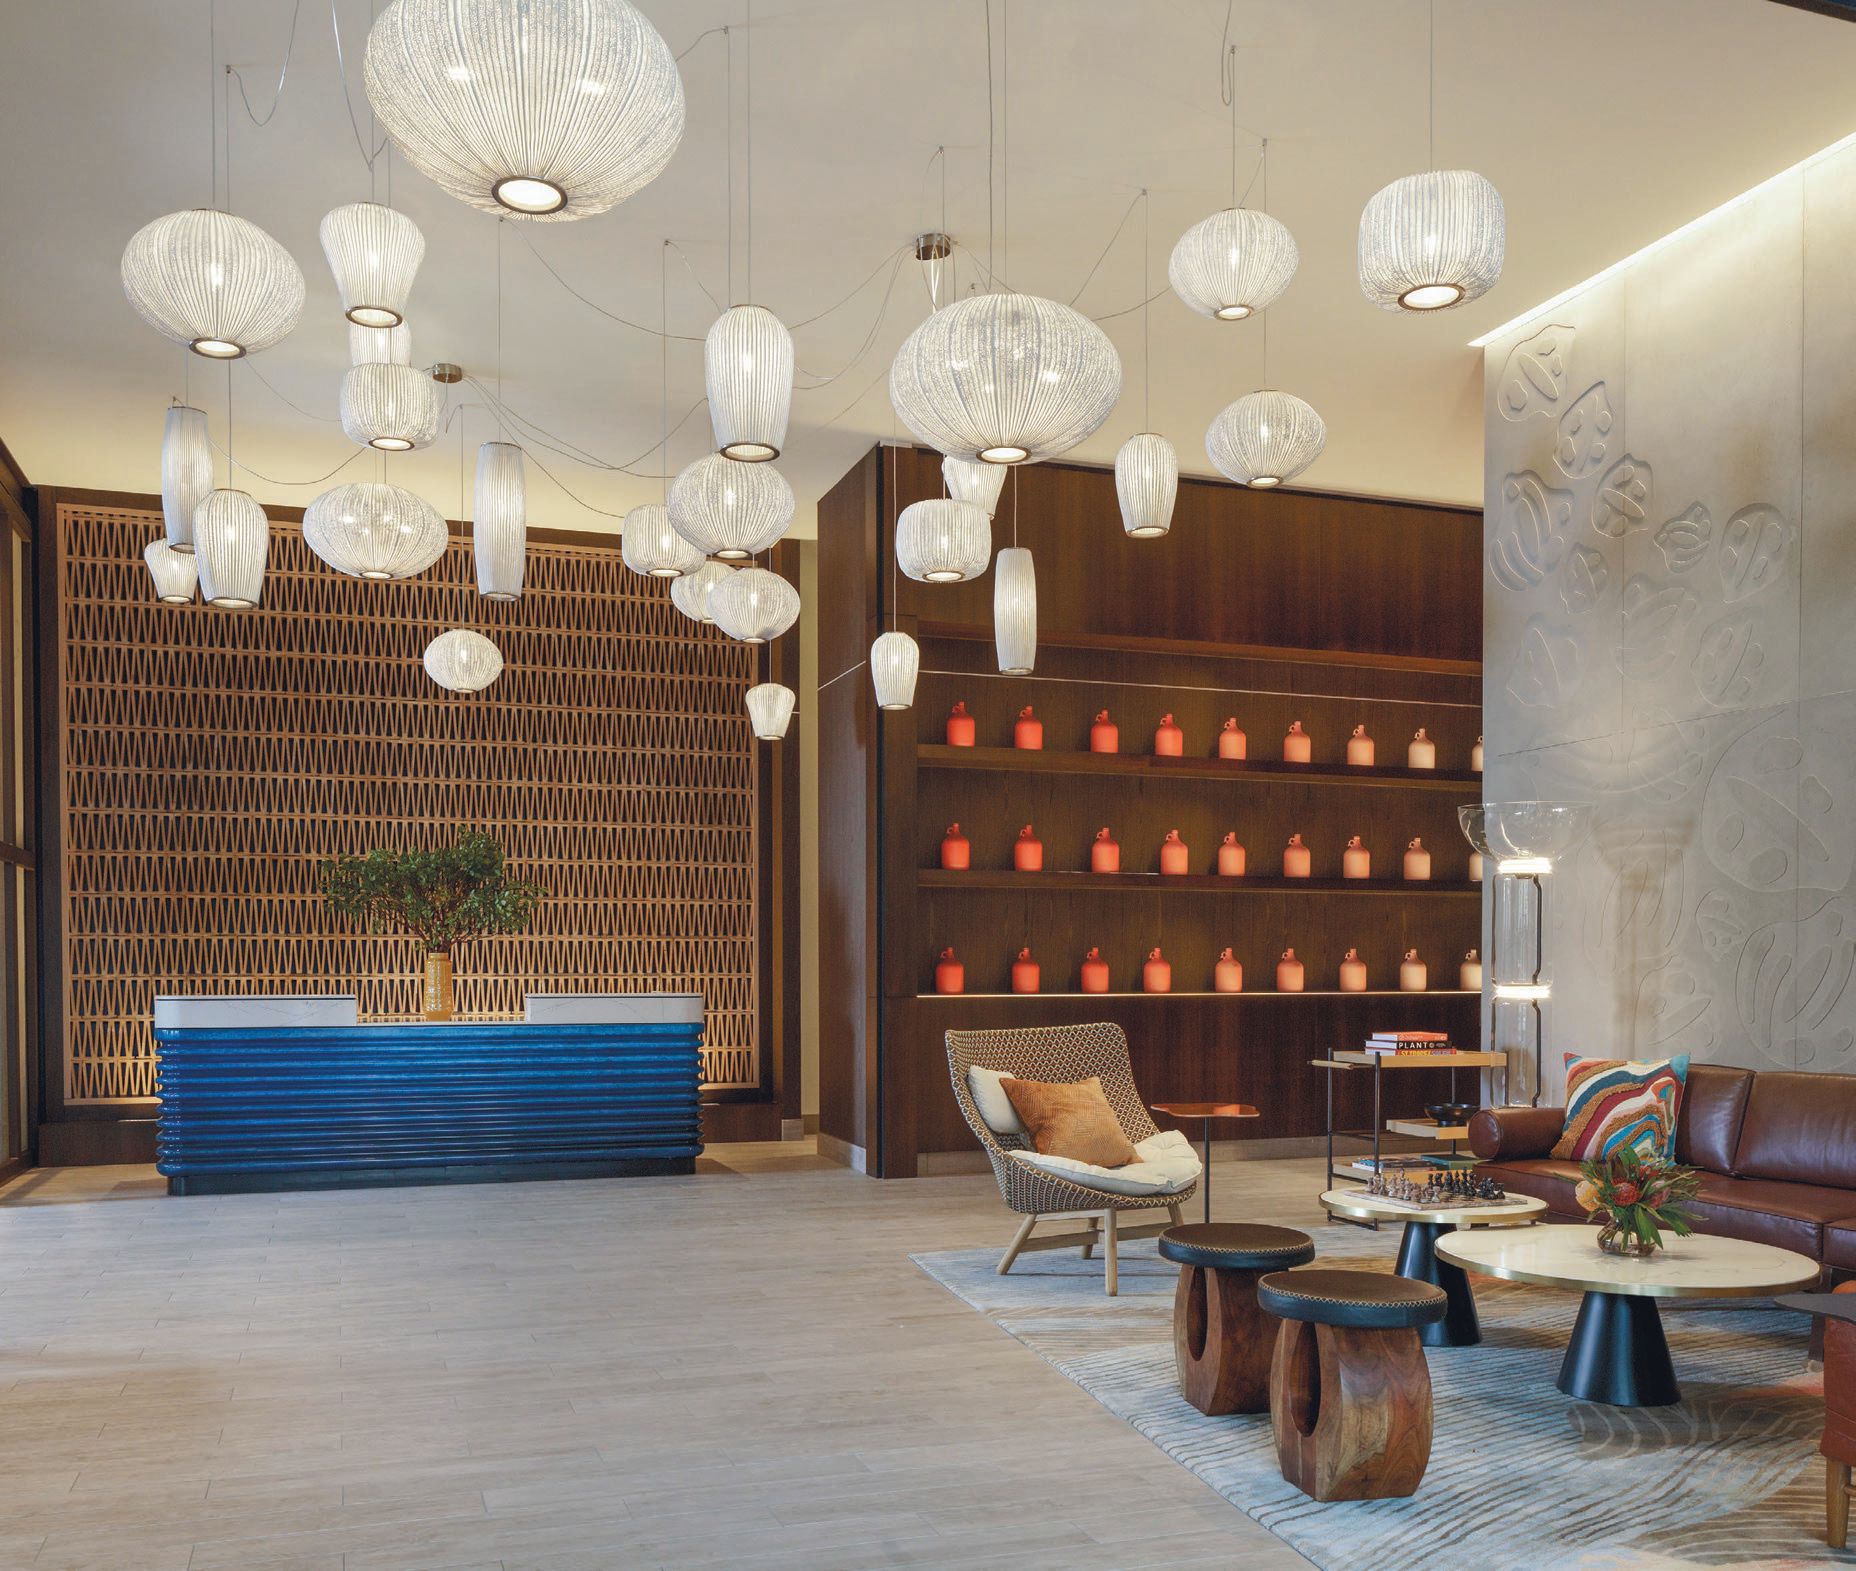 Hyatt Centric Buckhead Atlanta’s lobby features chic earthy tones and textures that nod to the history of Georgia’s pottery industry. PHOTO COURTESY OF REEVES YOUNG